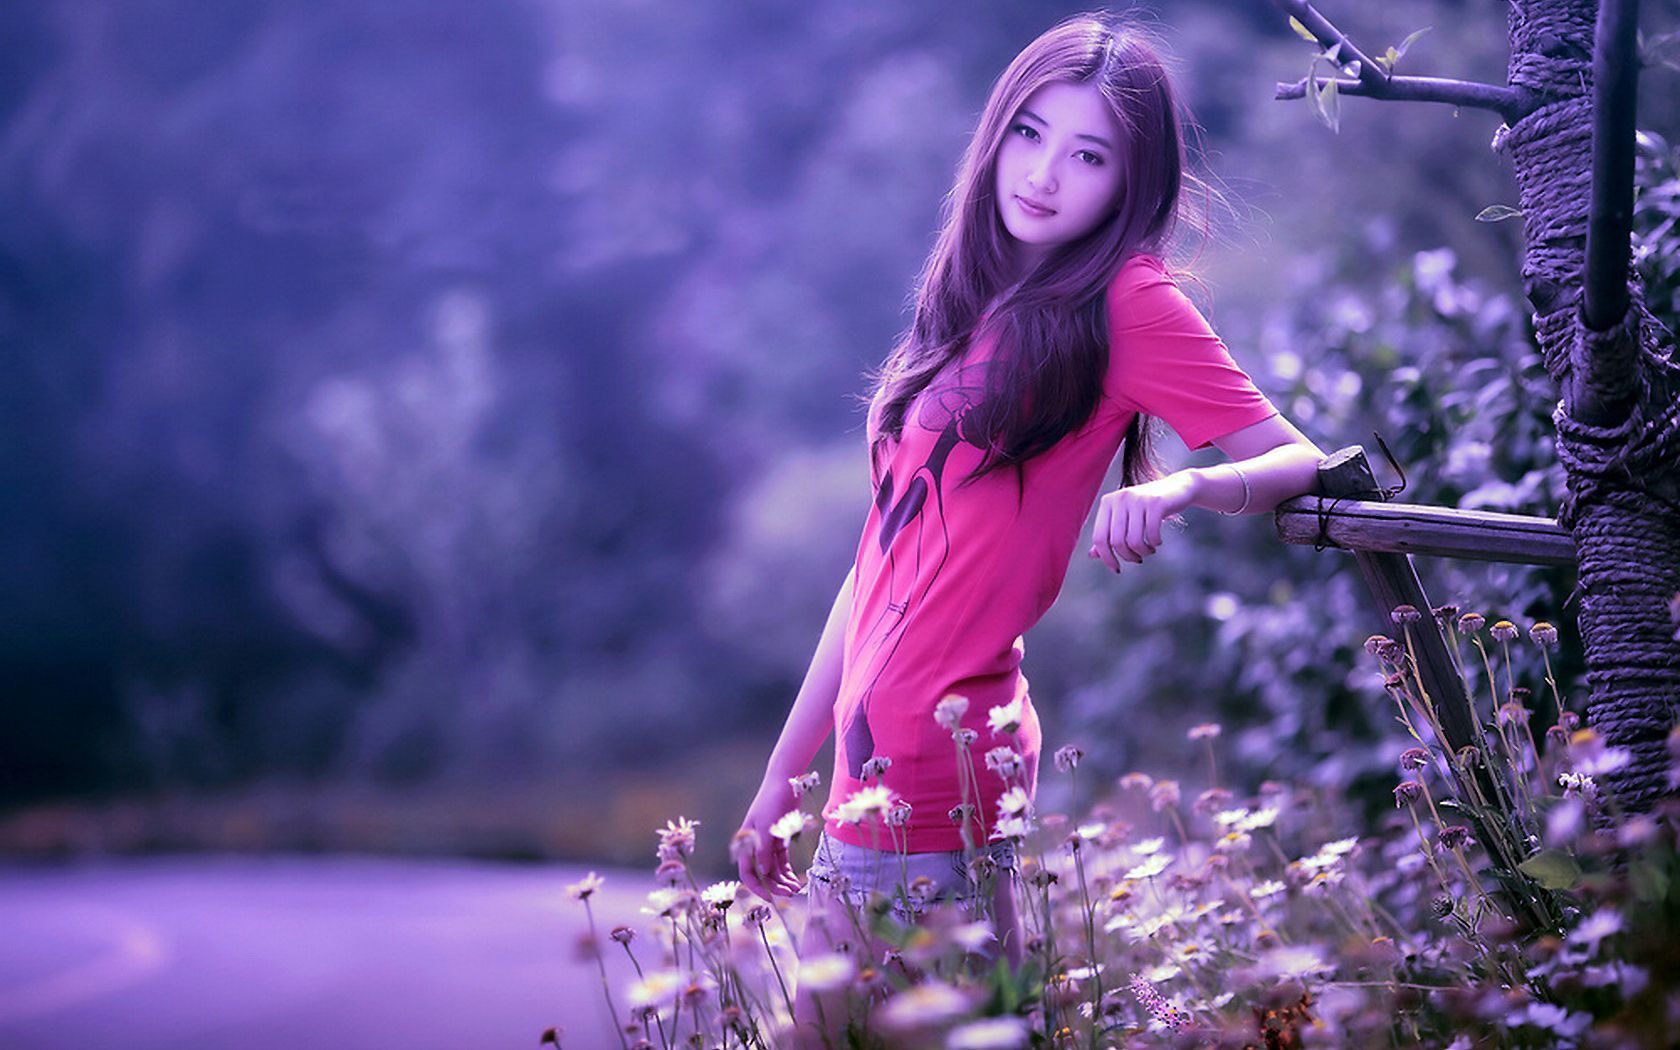 Spring Fashion Pretty Girl Wallpapers - Wallpaper Cave